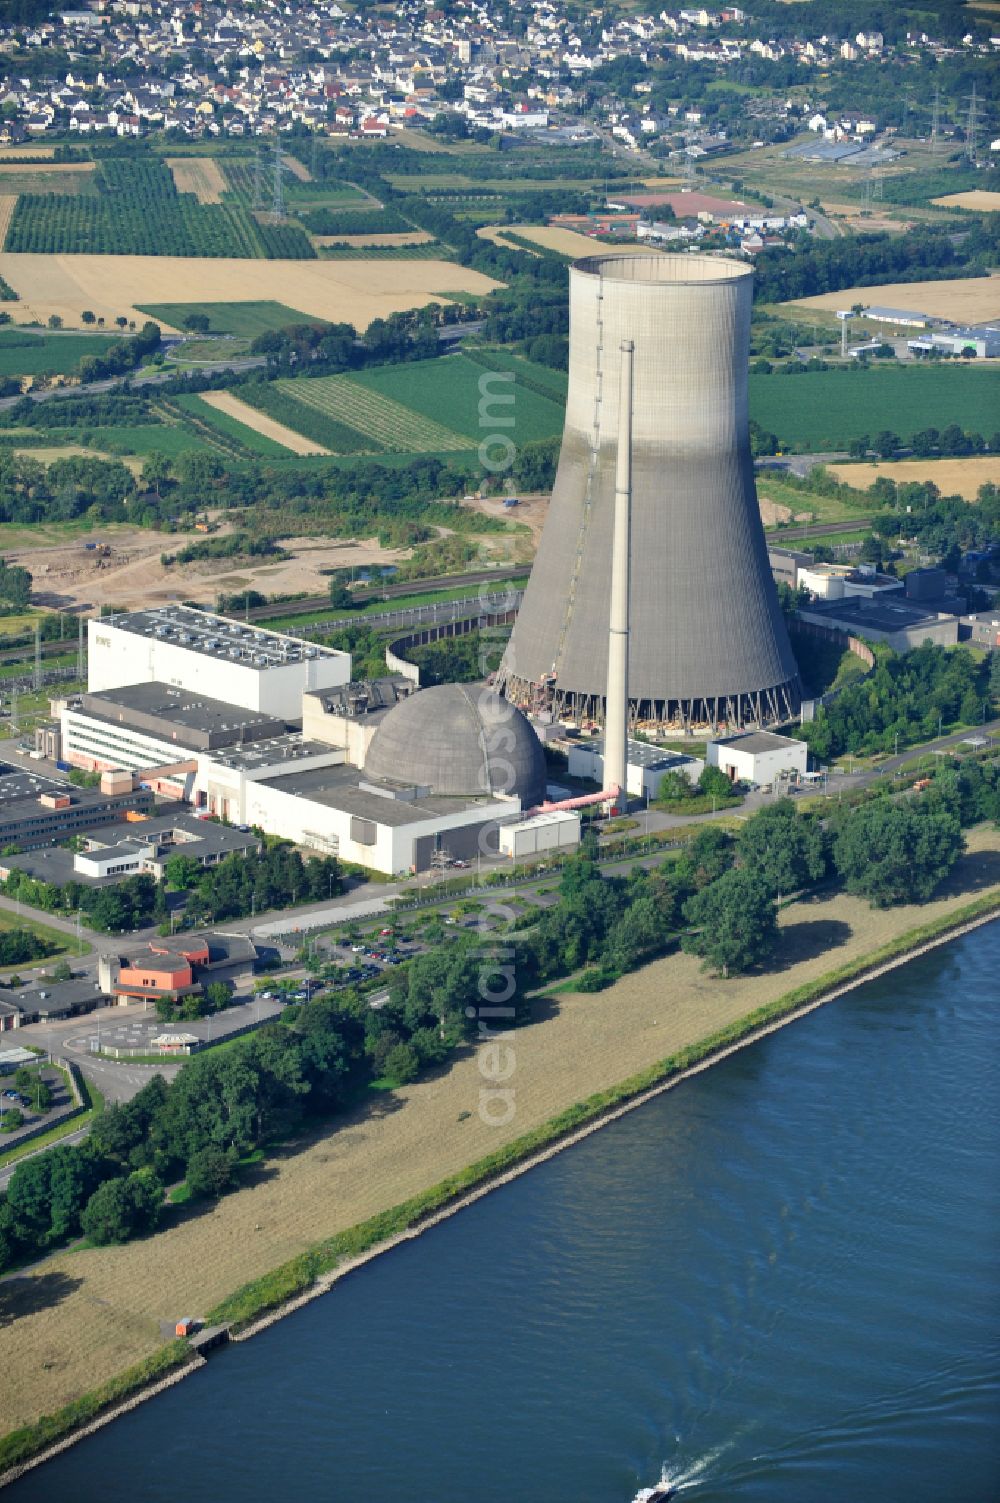 Aerial photograph Mülheim-Kärlich - Building remains of the reactor units and facilities of the NPP nuclear power plant on street K44 in Muelheim-Kaerlich in the state Rhineland-Palatinate, Germany